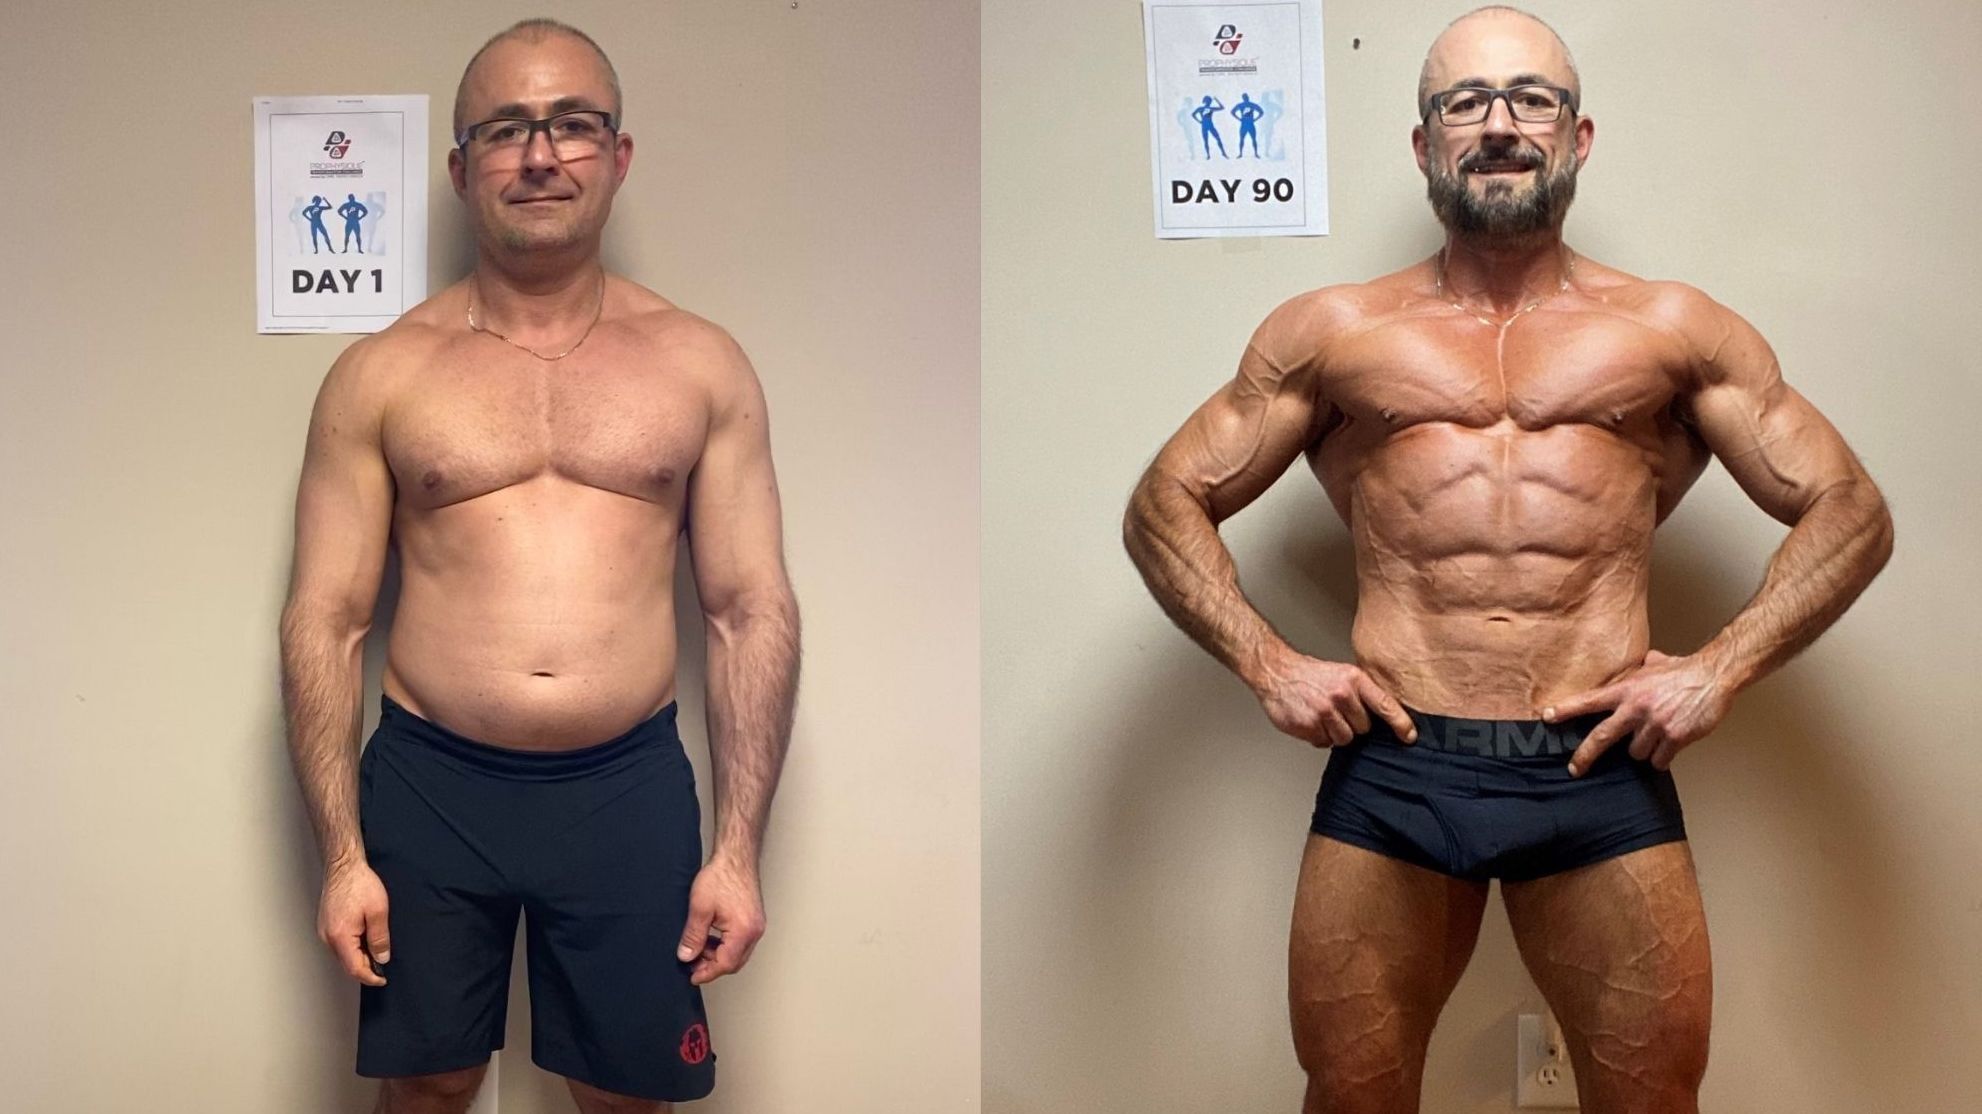 I Did Weighted Vest Training Every Day for 30 Days - [Before/After] 